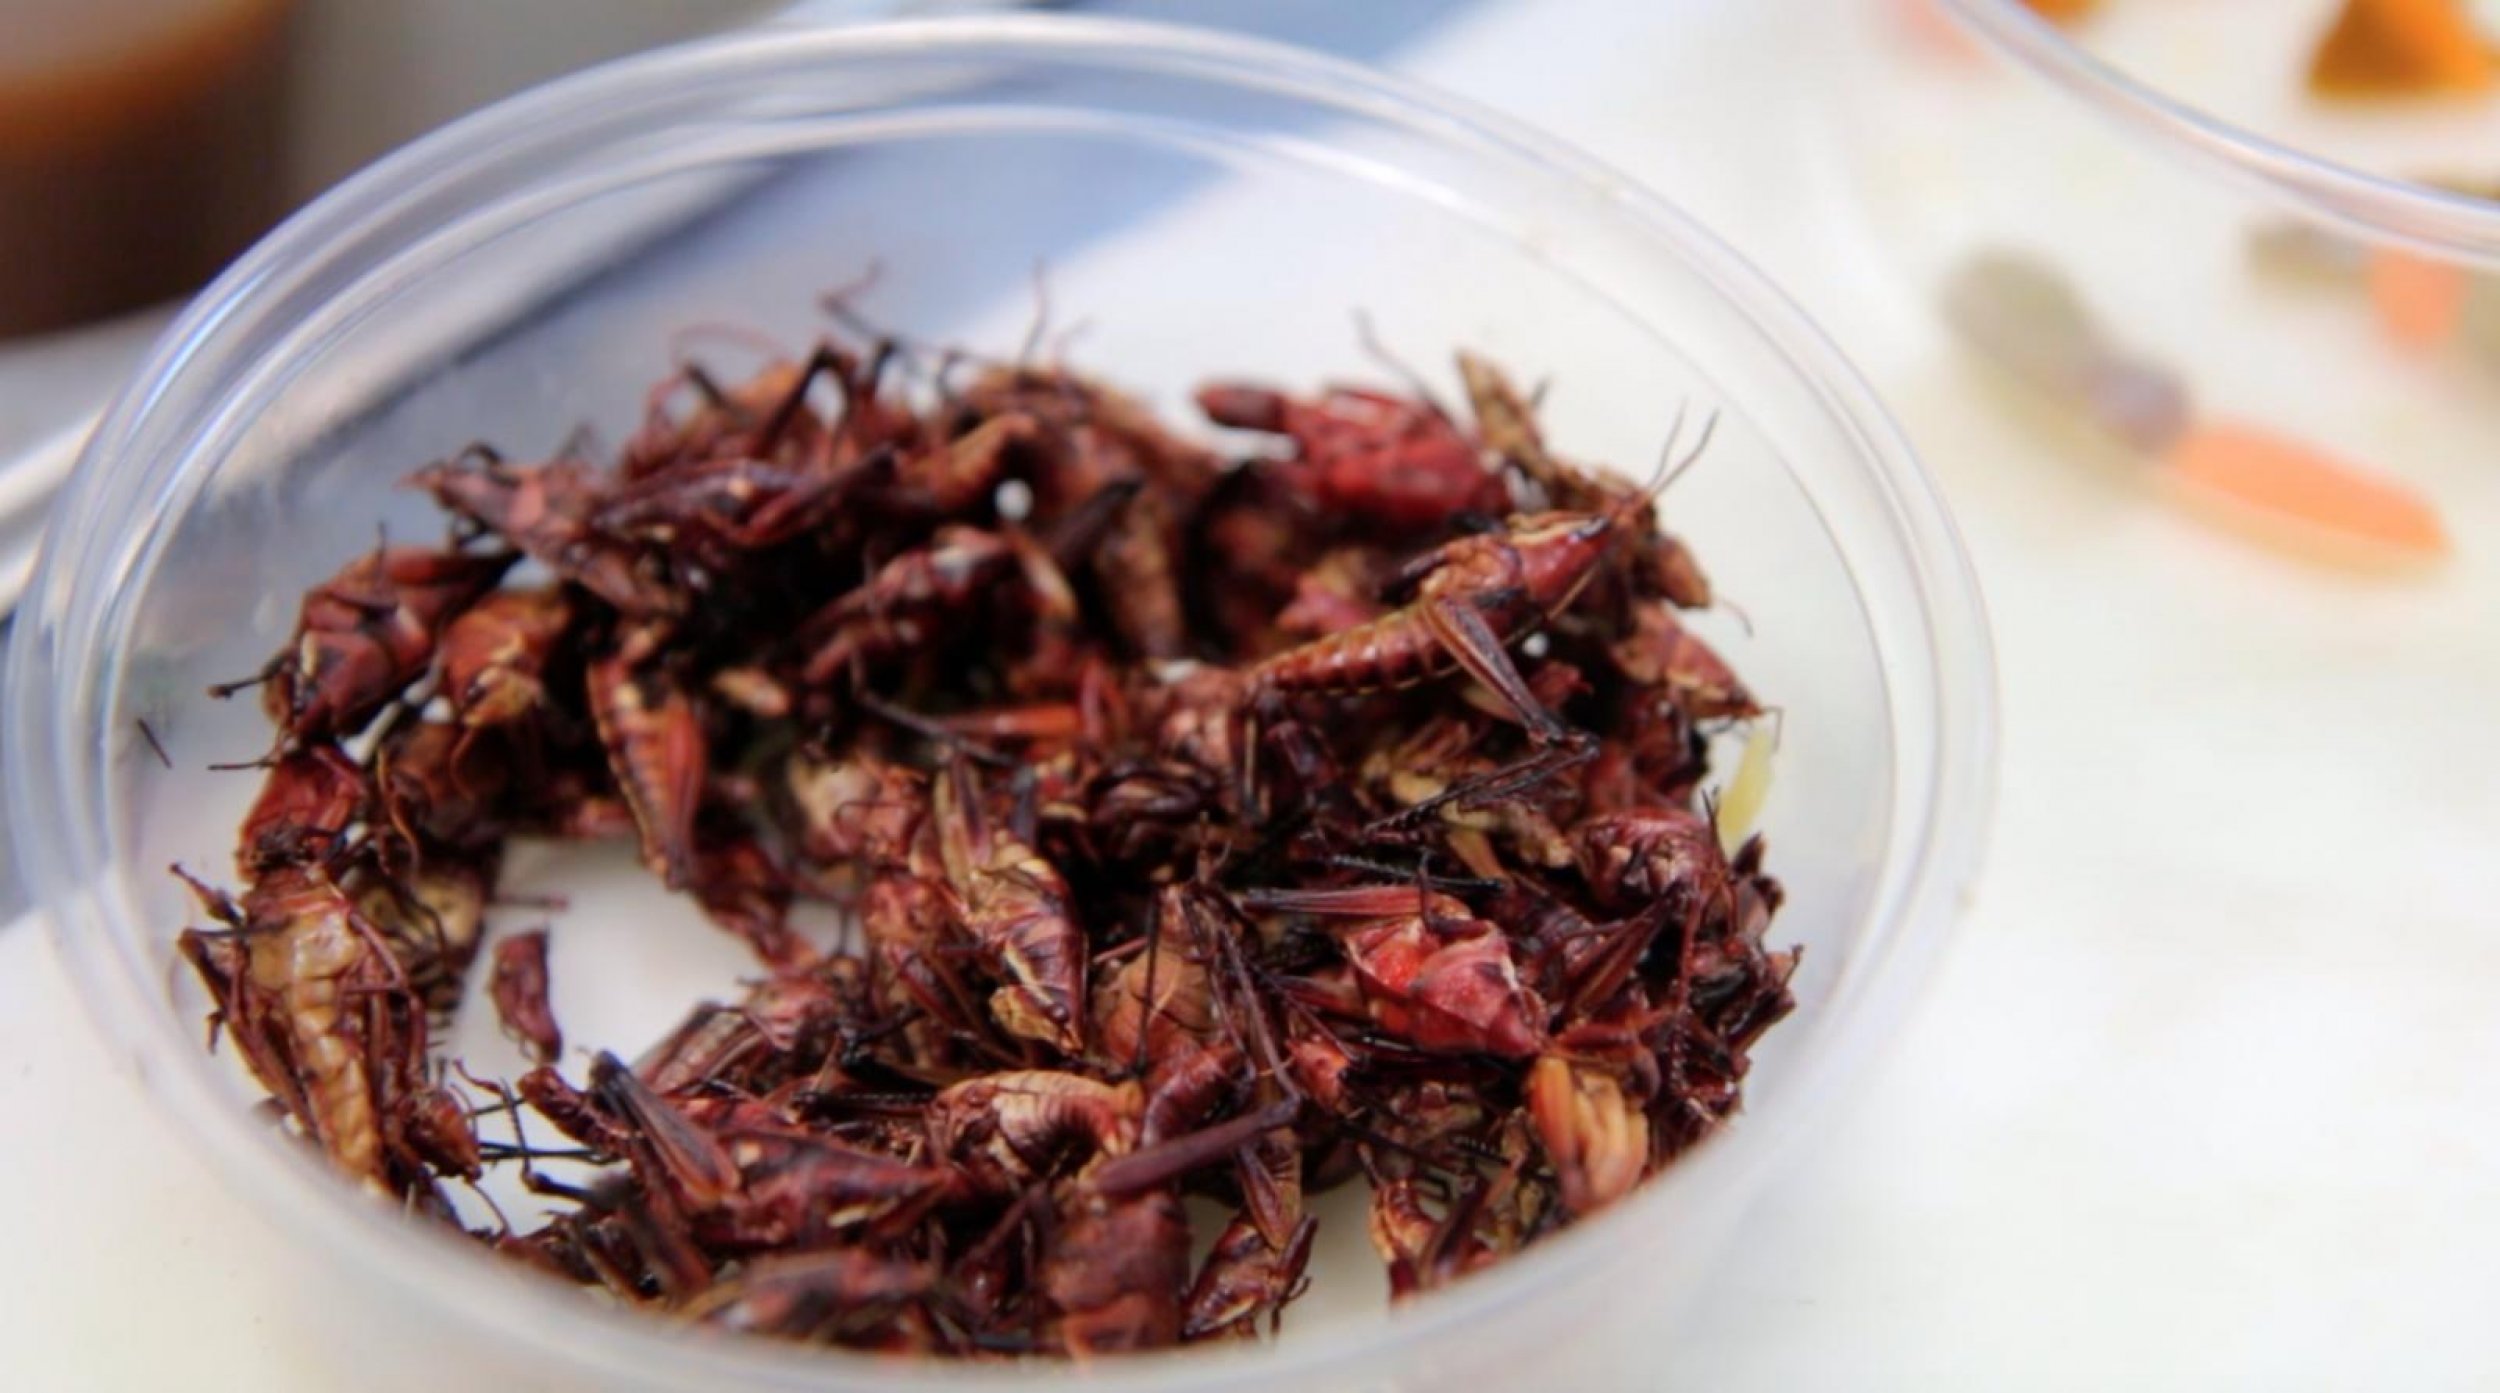 I Ate Insects For A Week